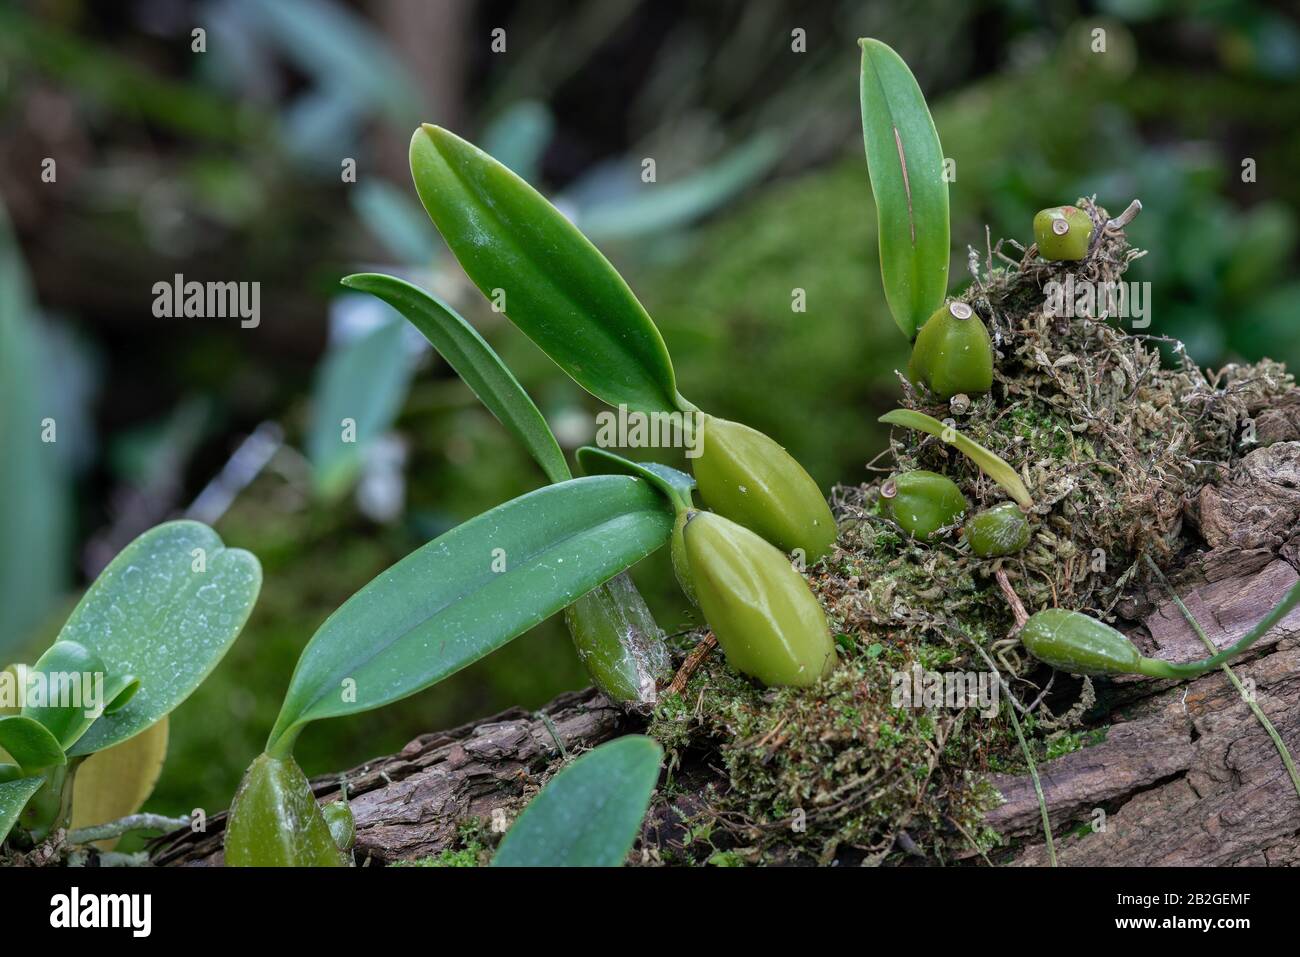 Young plants of bulbophyllum cocoinum growing on a tree trunk Stock Photo